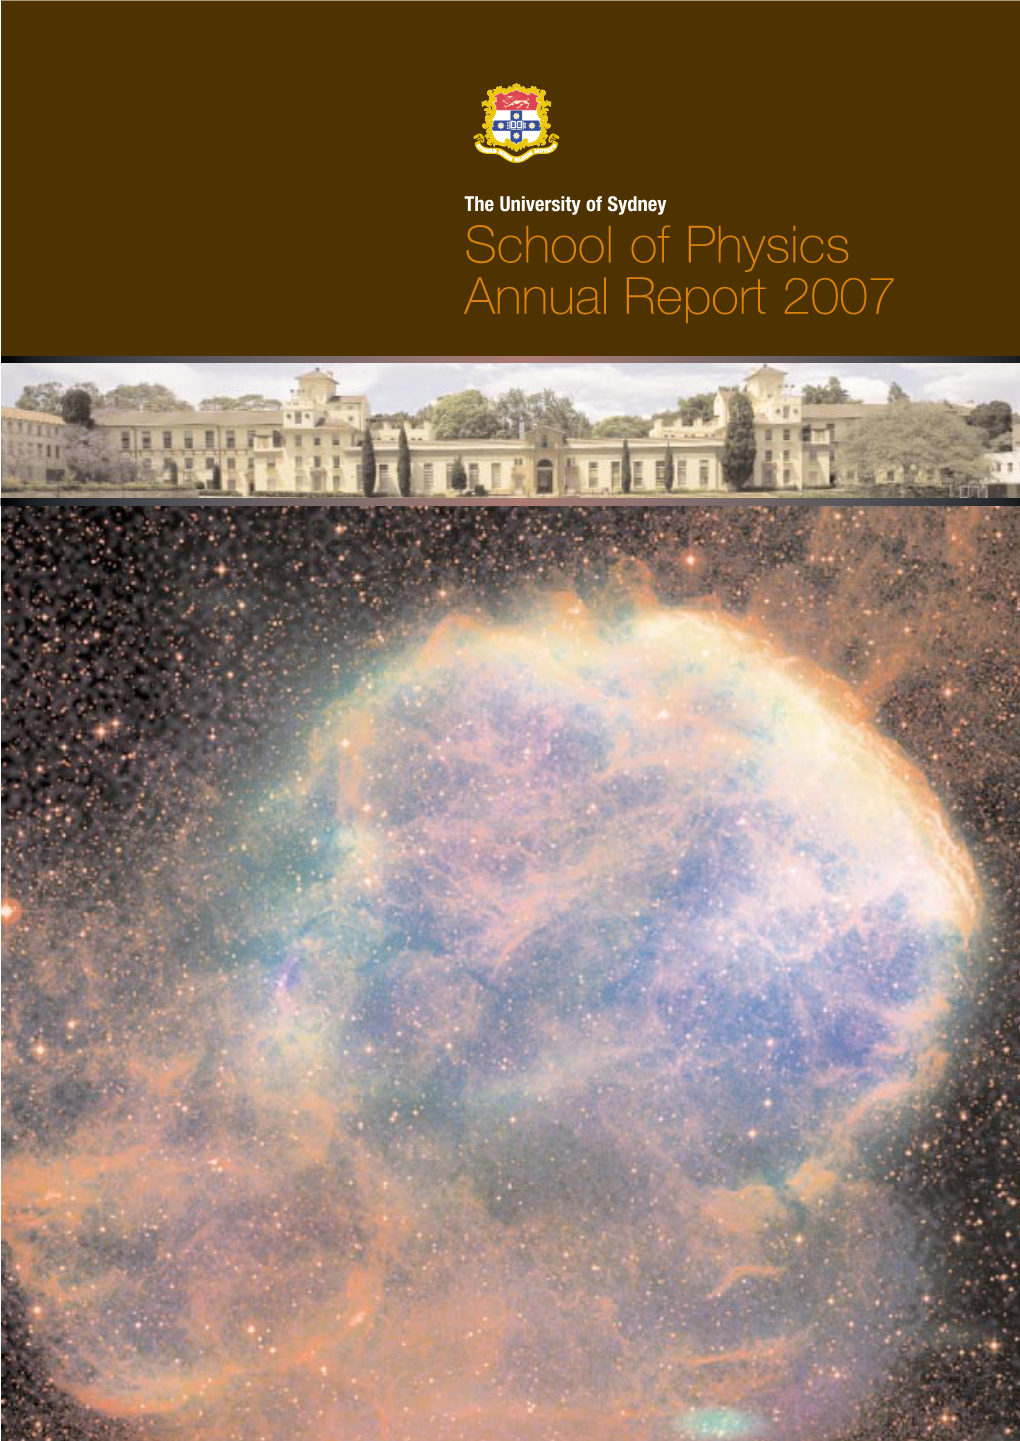 School of Physics Annual Report 2007 Contents